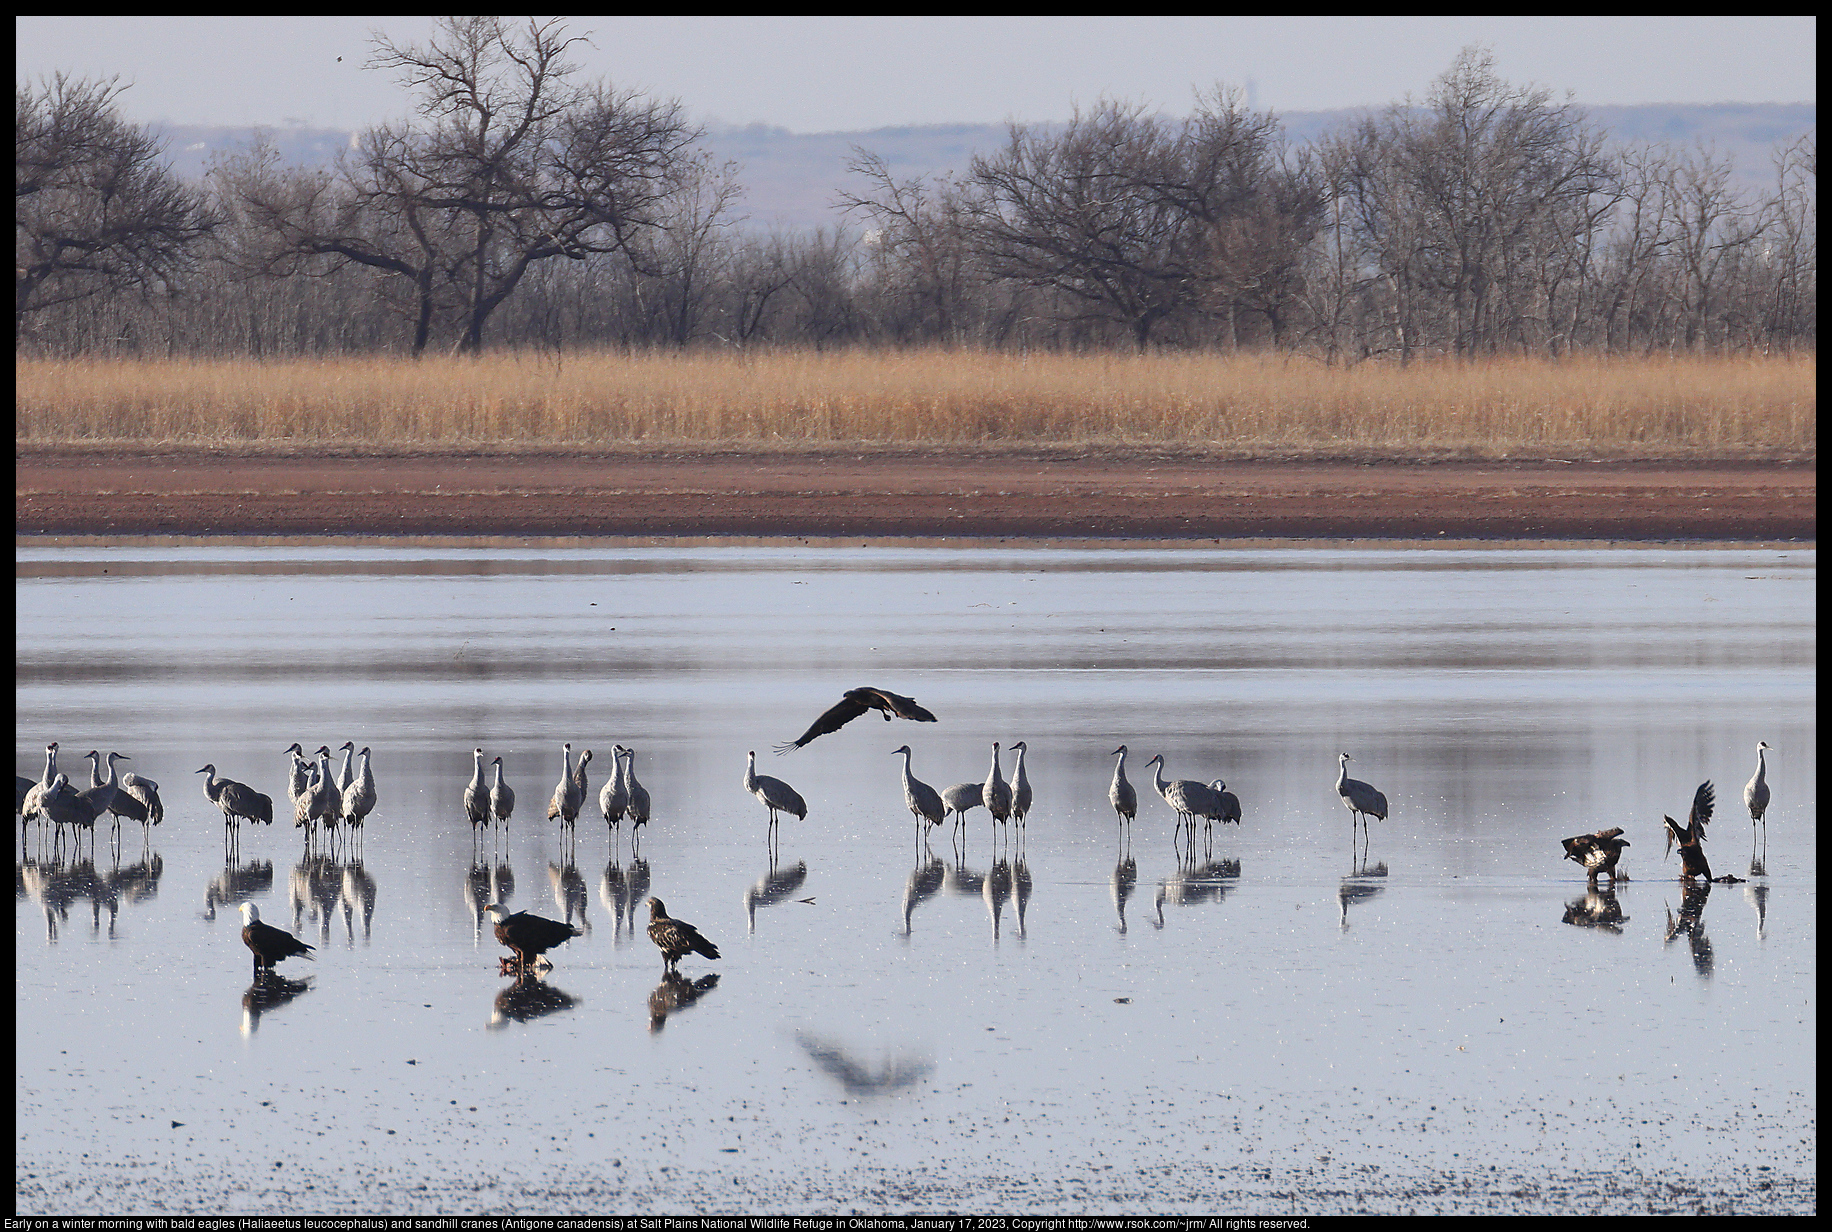 Early on a winter morning with bald eagles (Haliaeetus leucocephalus) and sandhill cranes (Antigone canadensis) at Salt Plains National Wildlife Refuge in Oklahoma, January 17, 2023